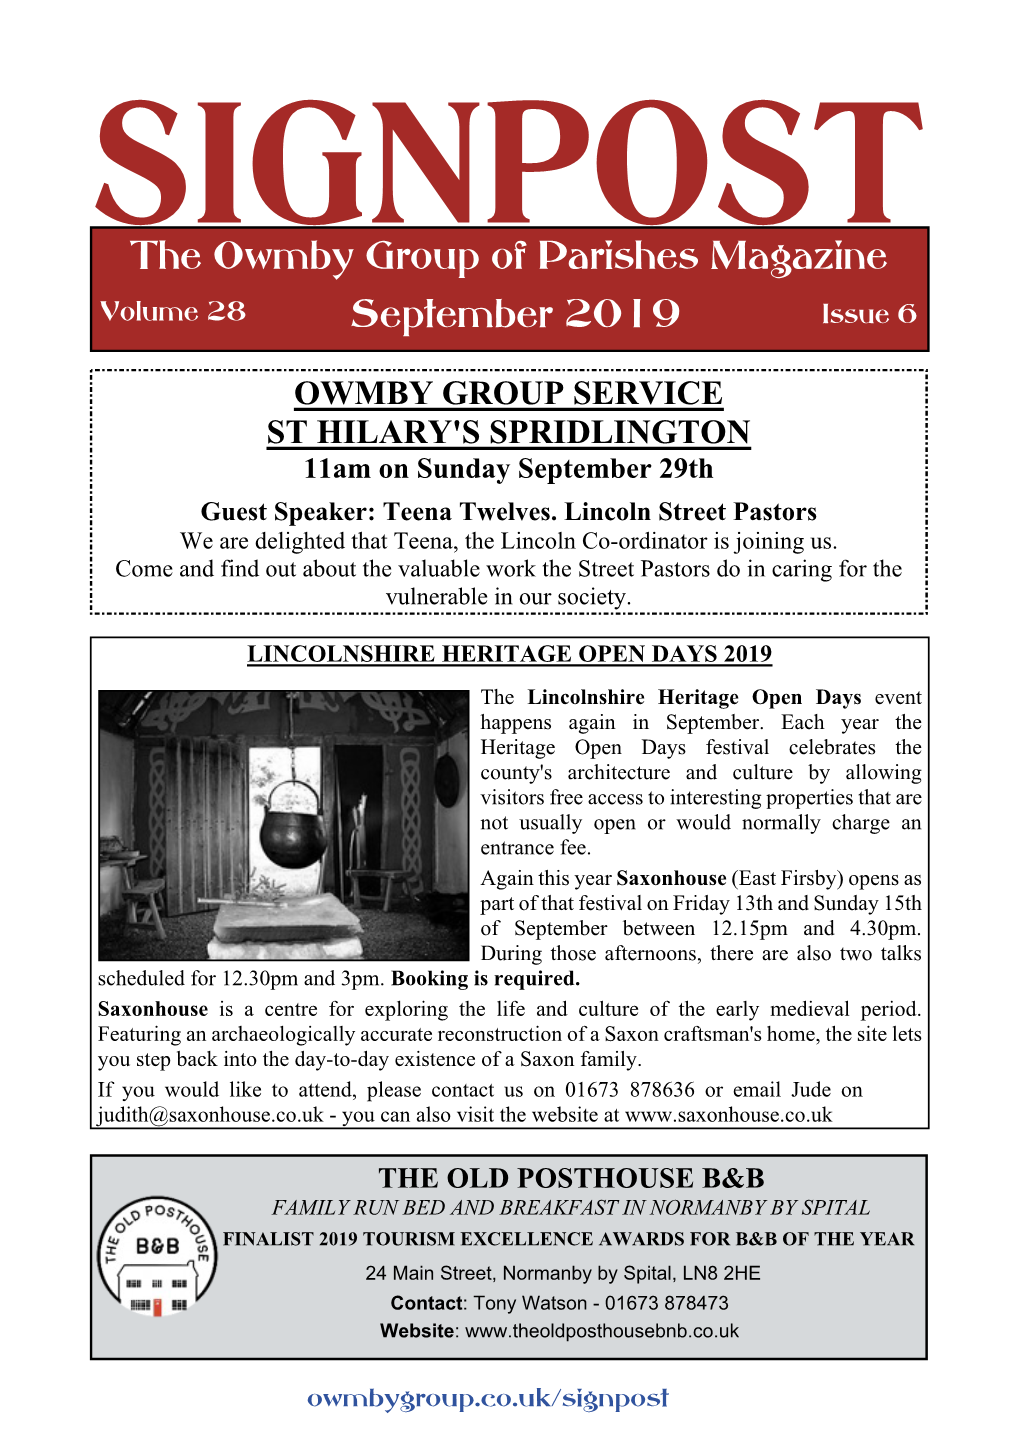 The Owmby Group of Parishes Magazine September 2019